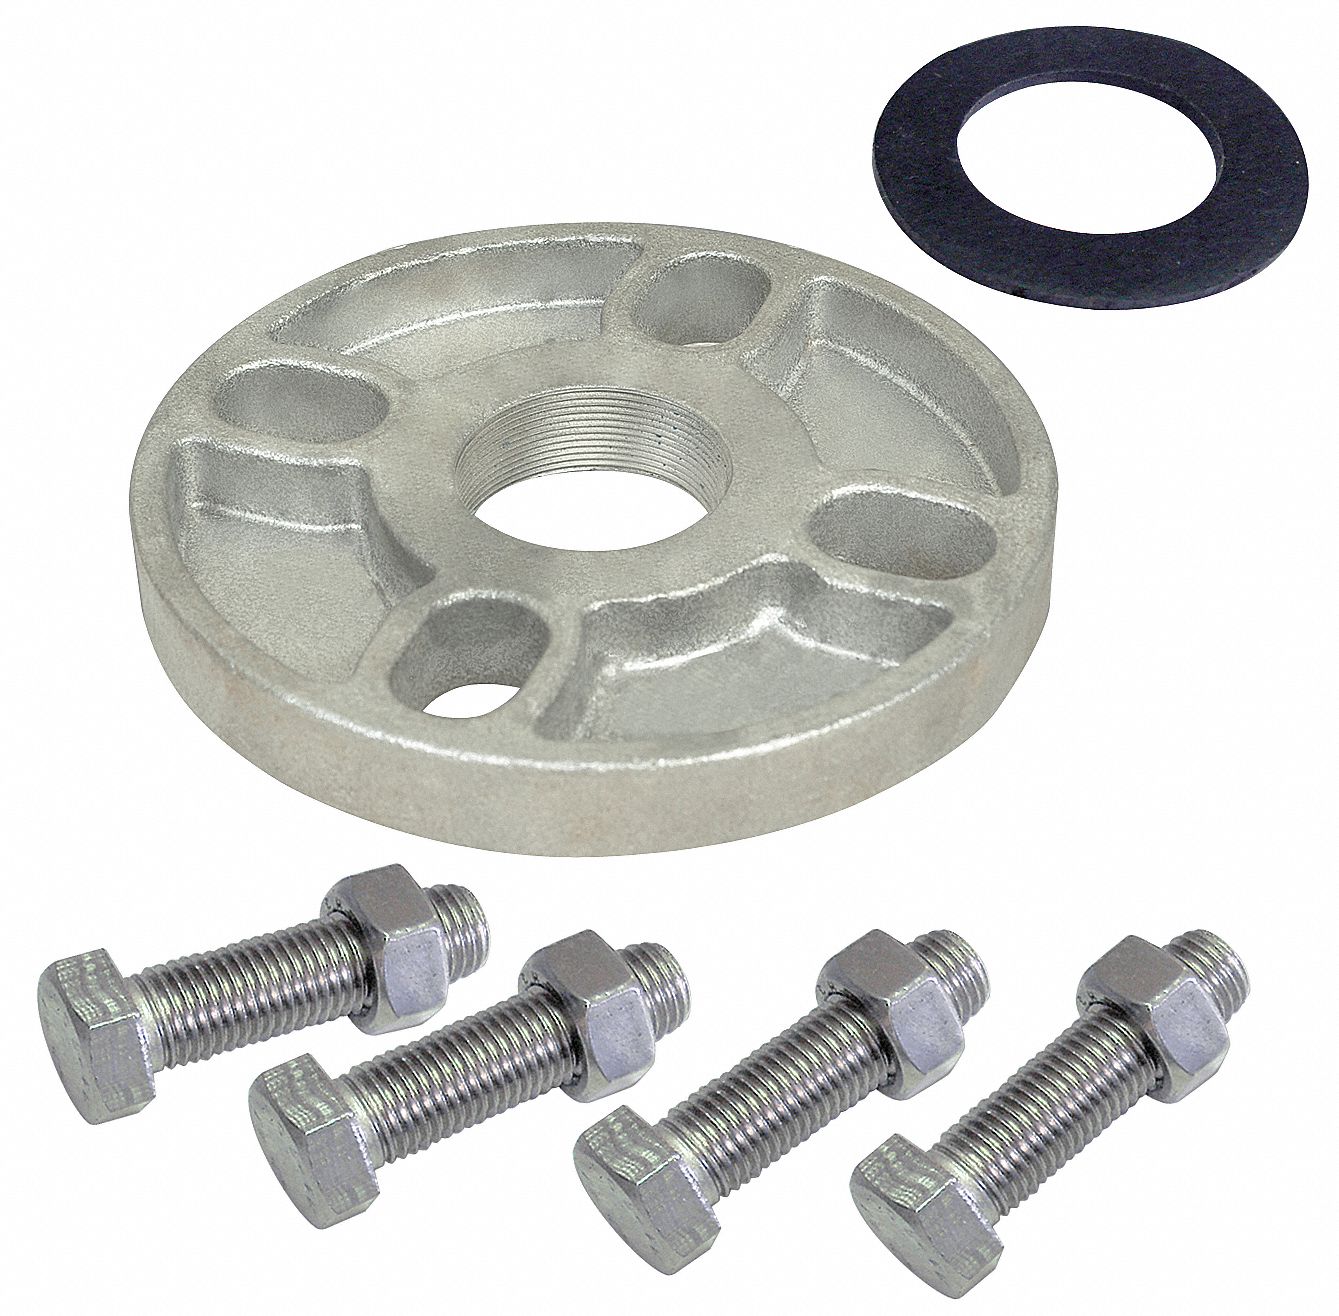 21R871 - Booster Pump Flange Kit 1-1/4 in NPT SS